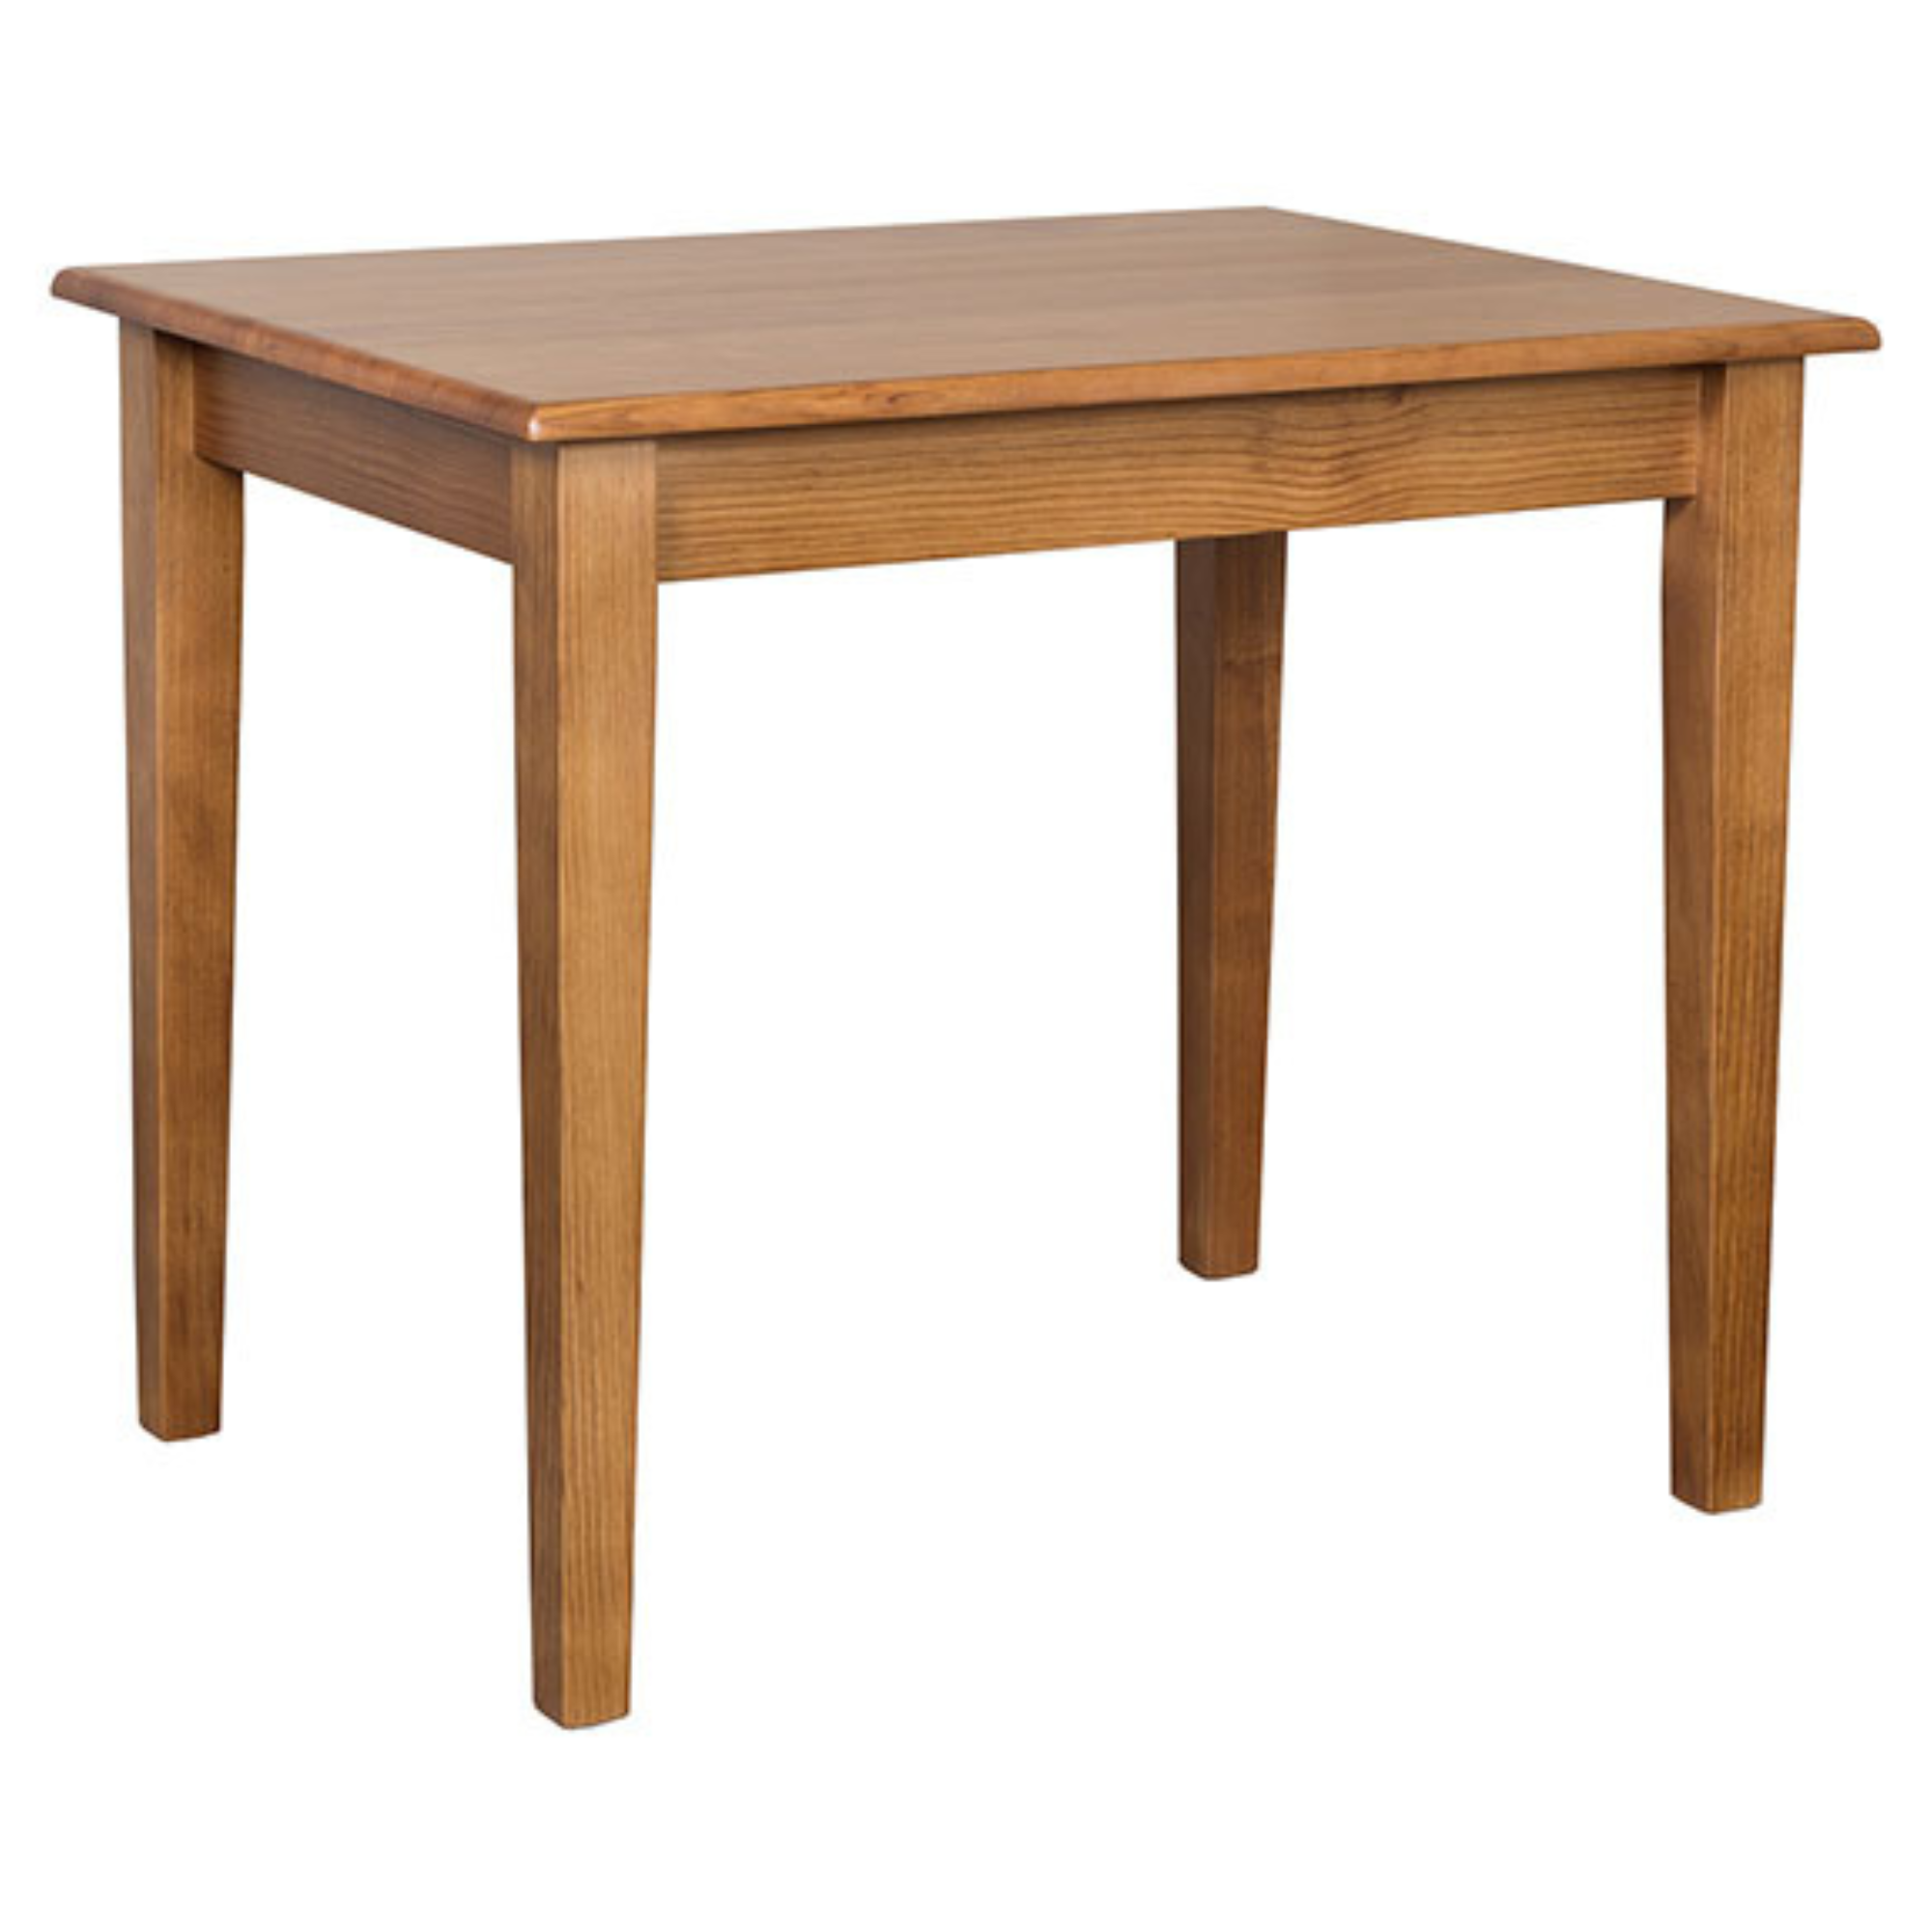 VILLAGER 900 DINING TABLE | NZ MADE